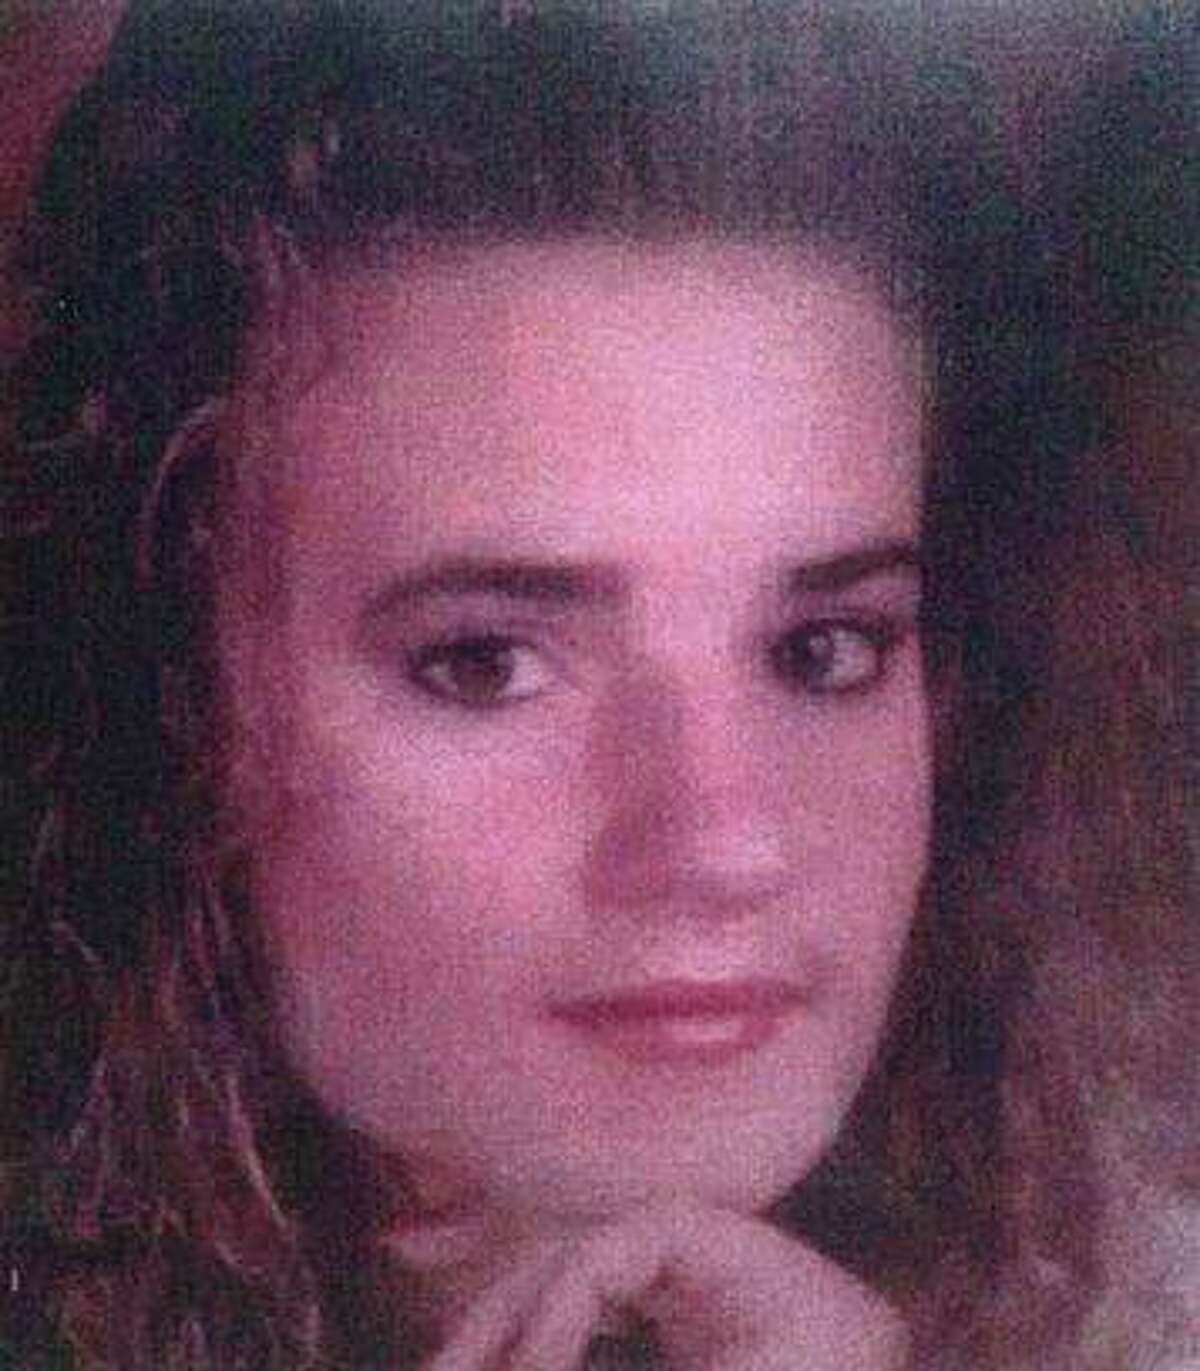 Priscilla Lewis was slain in a restroom of the pizzeria in Crockett, where she worked in 1996. Investigators said they have solved the cold case.